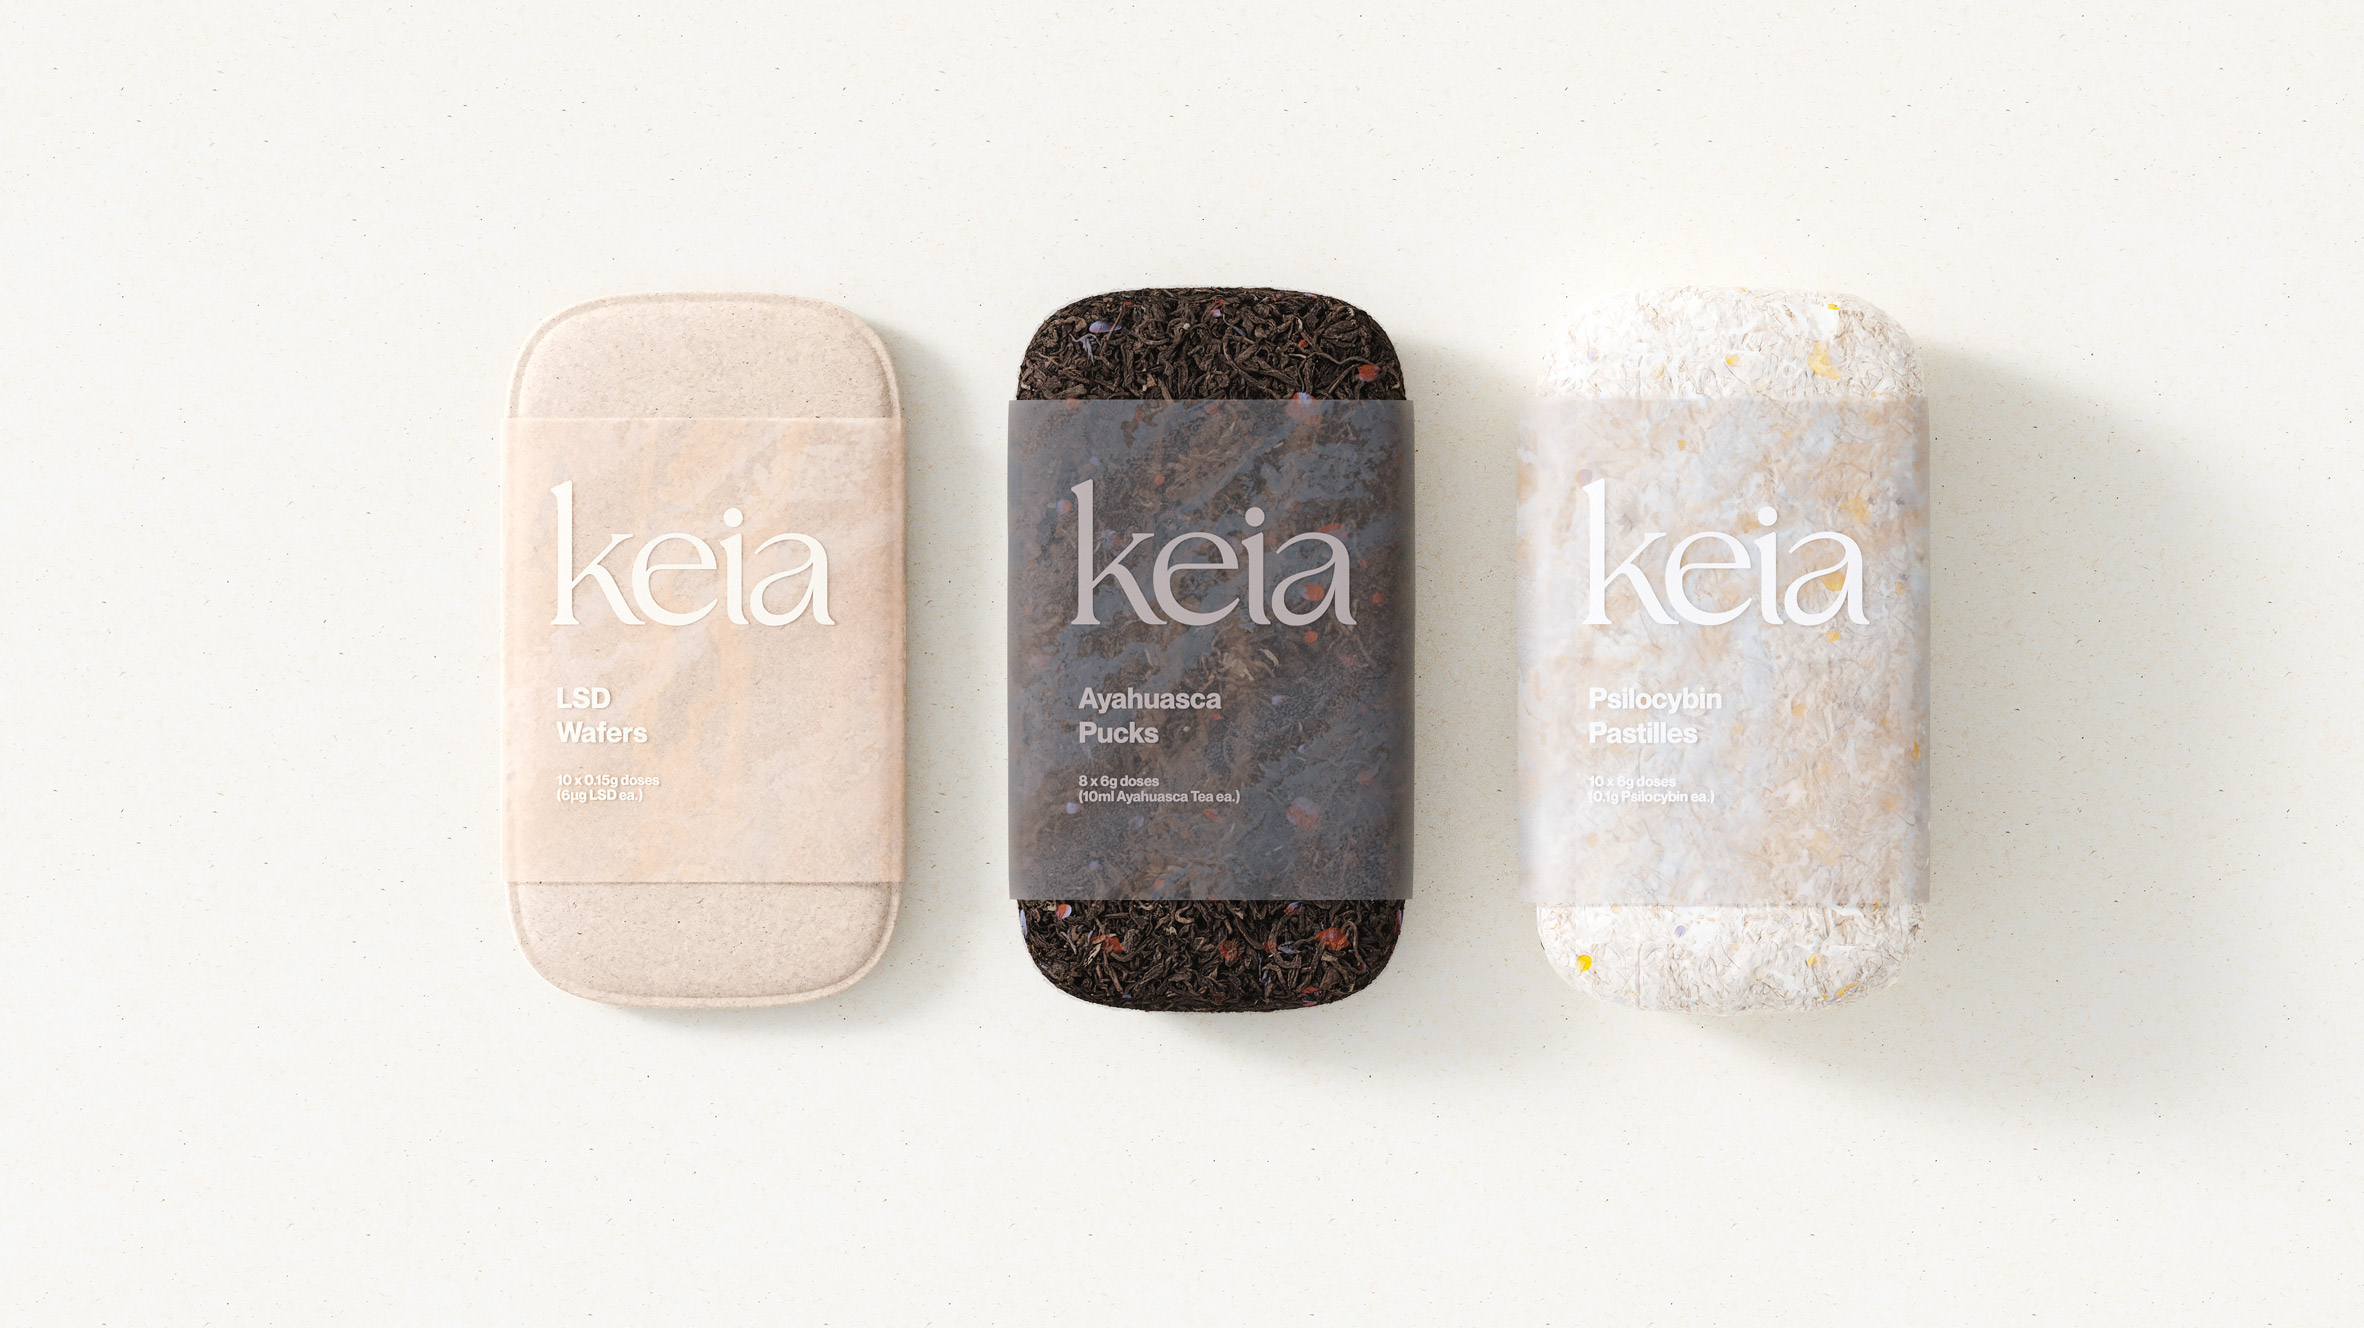 Rendering of three different Keia products: LSD Wafers in light pink wheat-based packaging, Ayahuasca Pucks in dark brown leafy packaging and Psilocybin Pastilles in white flecked mycelium packaging for microdosing 